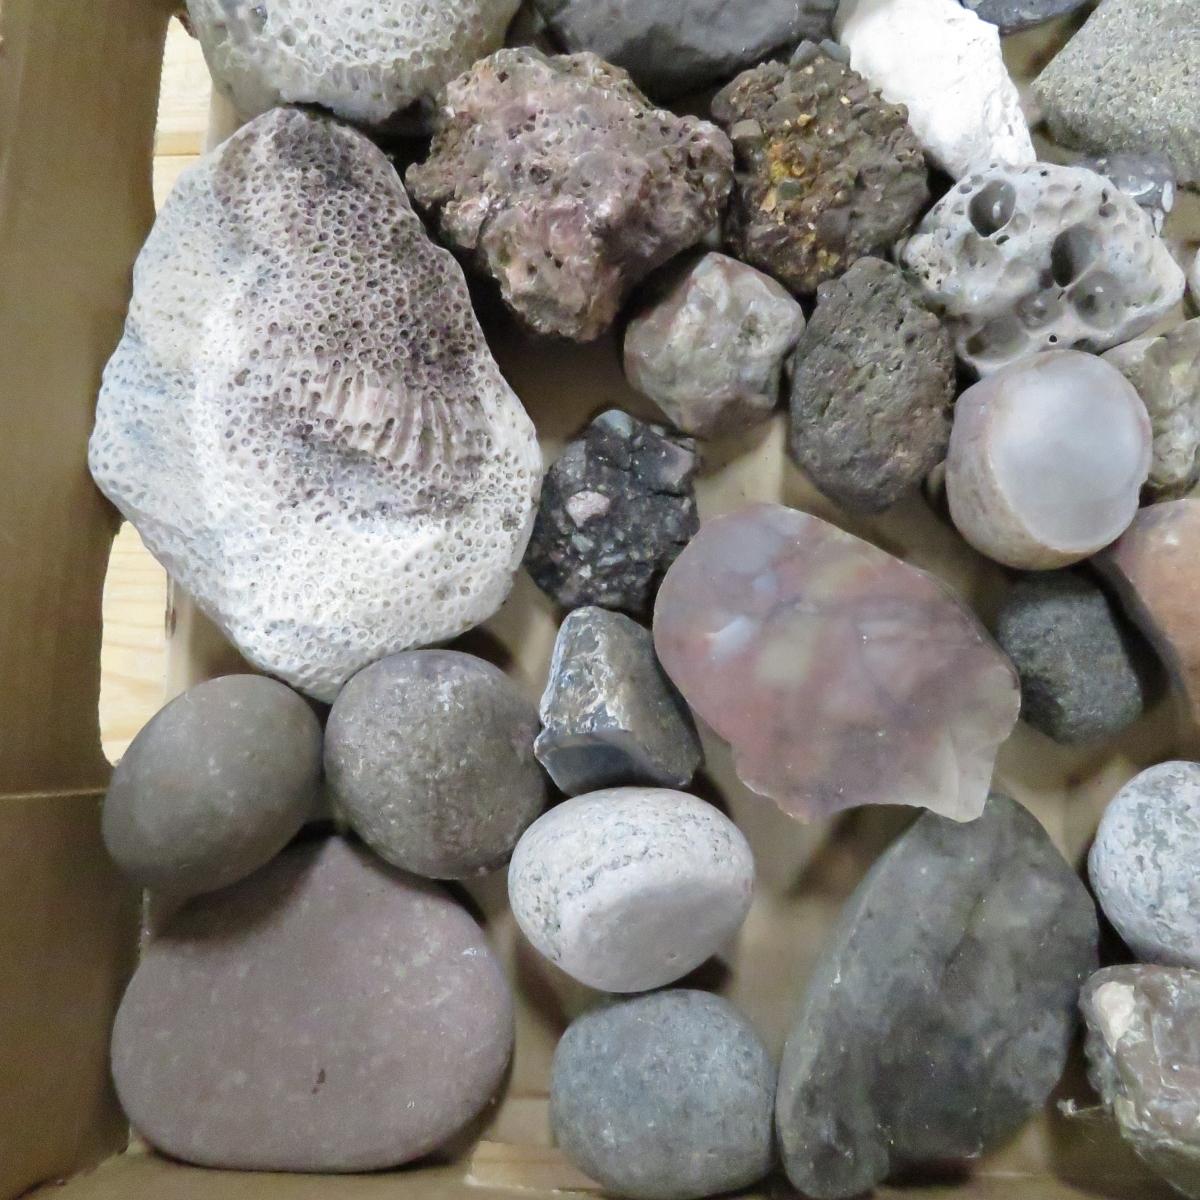 20 pounds mixed rocks, fossils, minerals